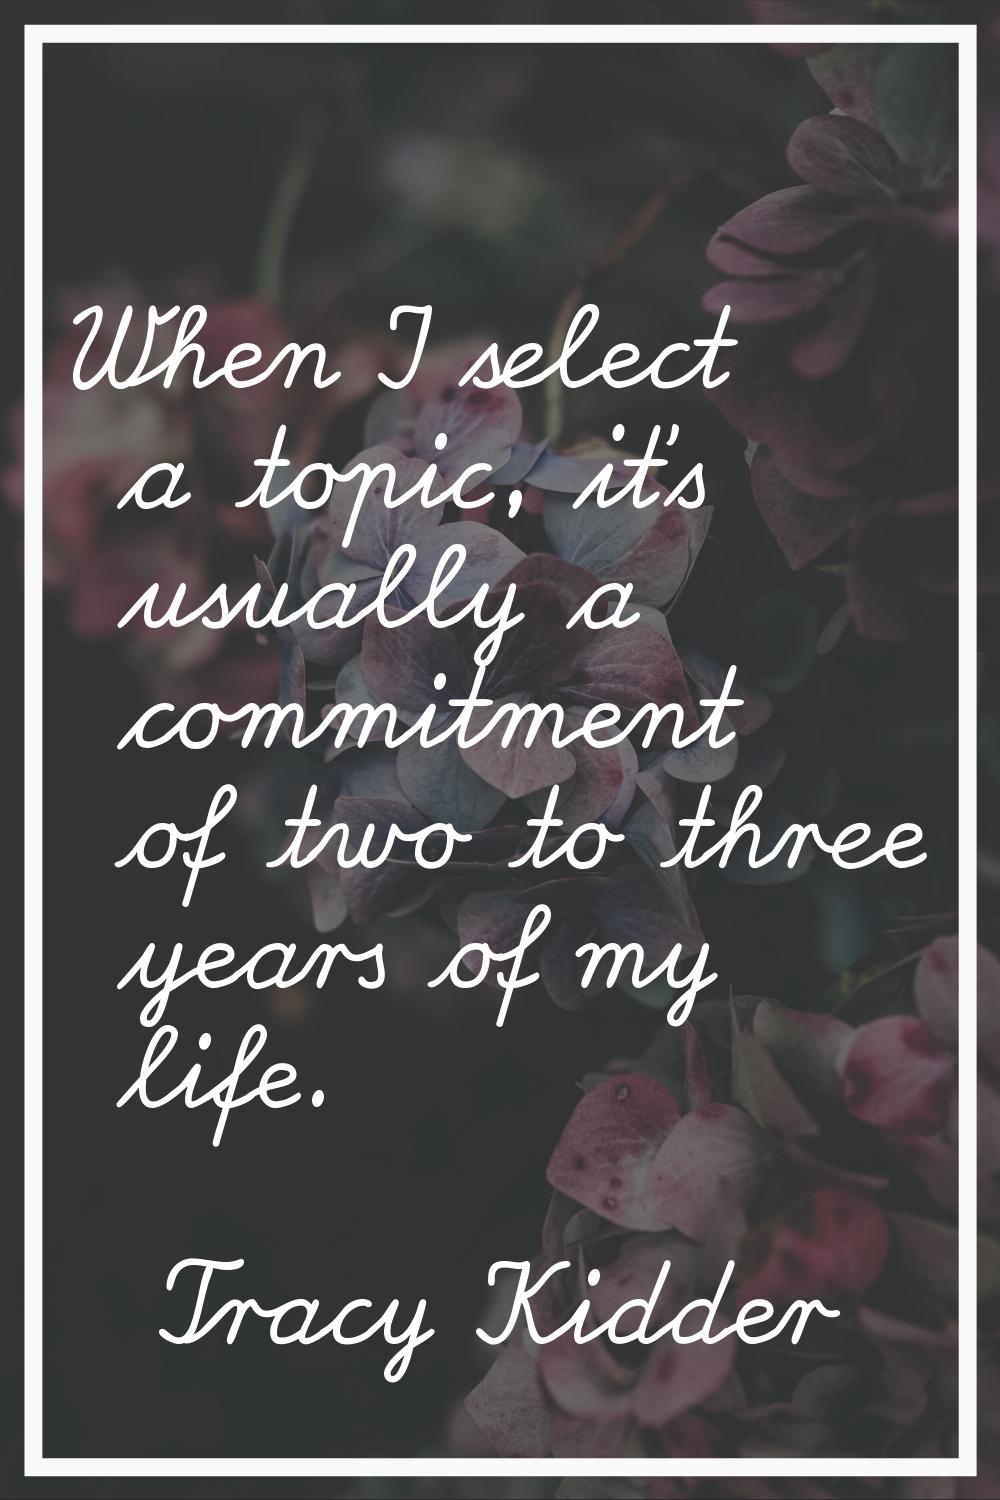 When I select a topic, it's usually a commitment of two to three years of my life.